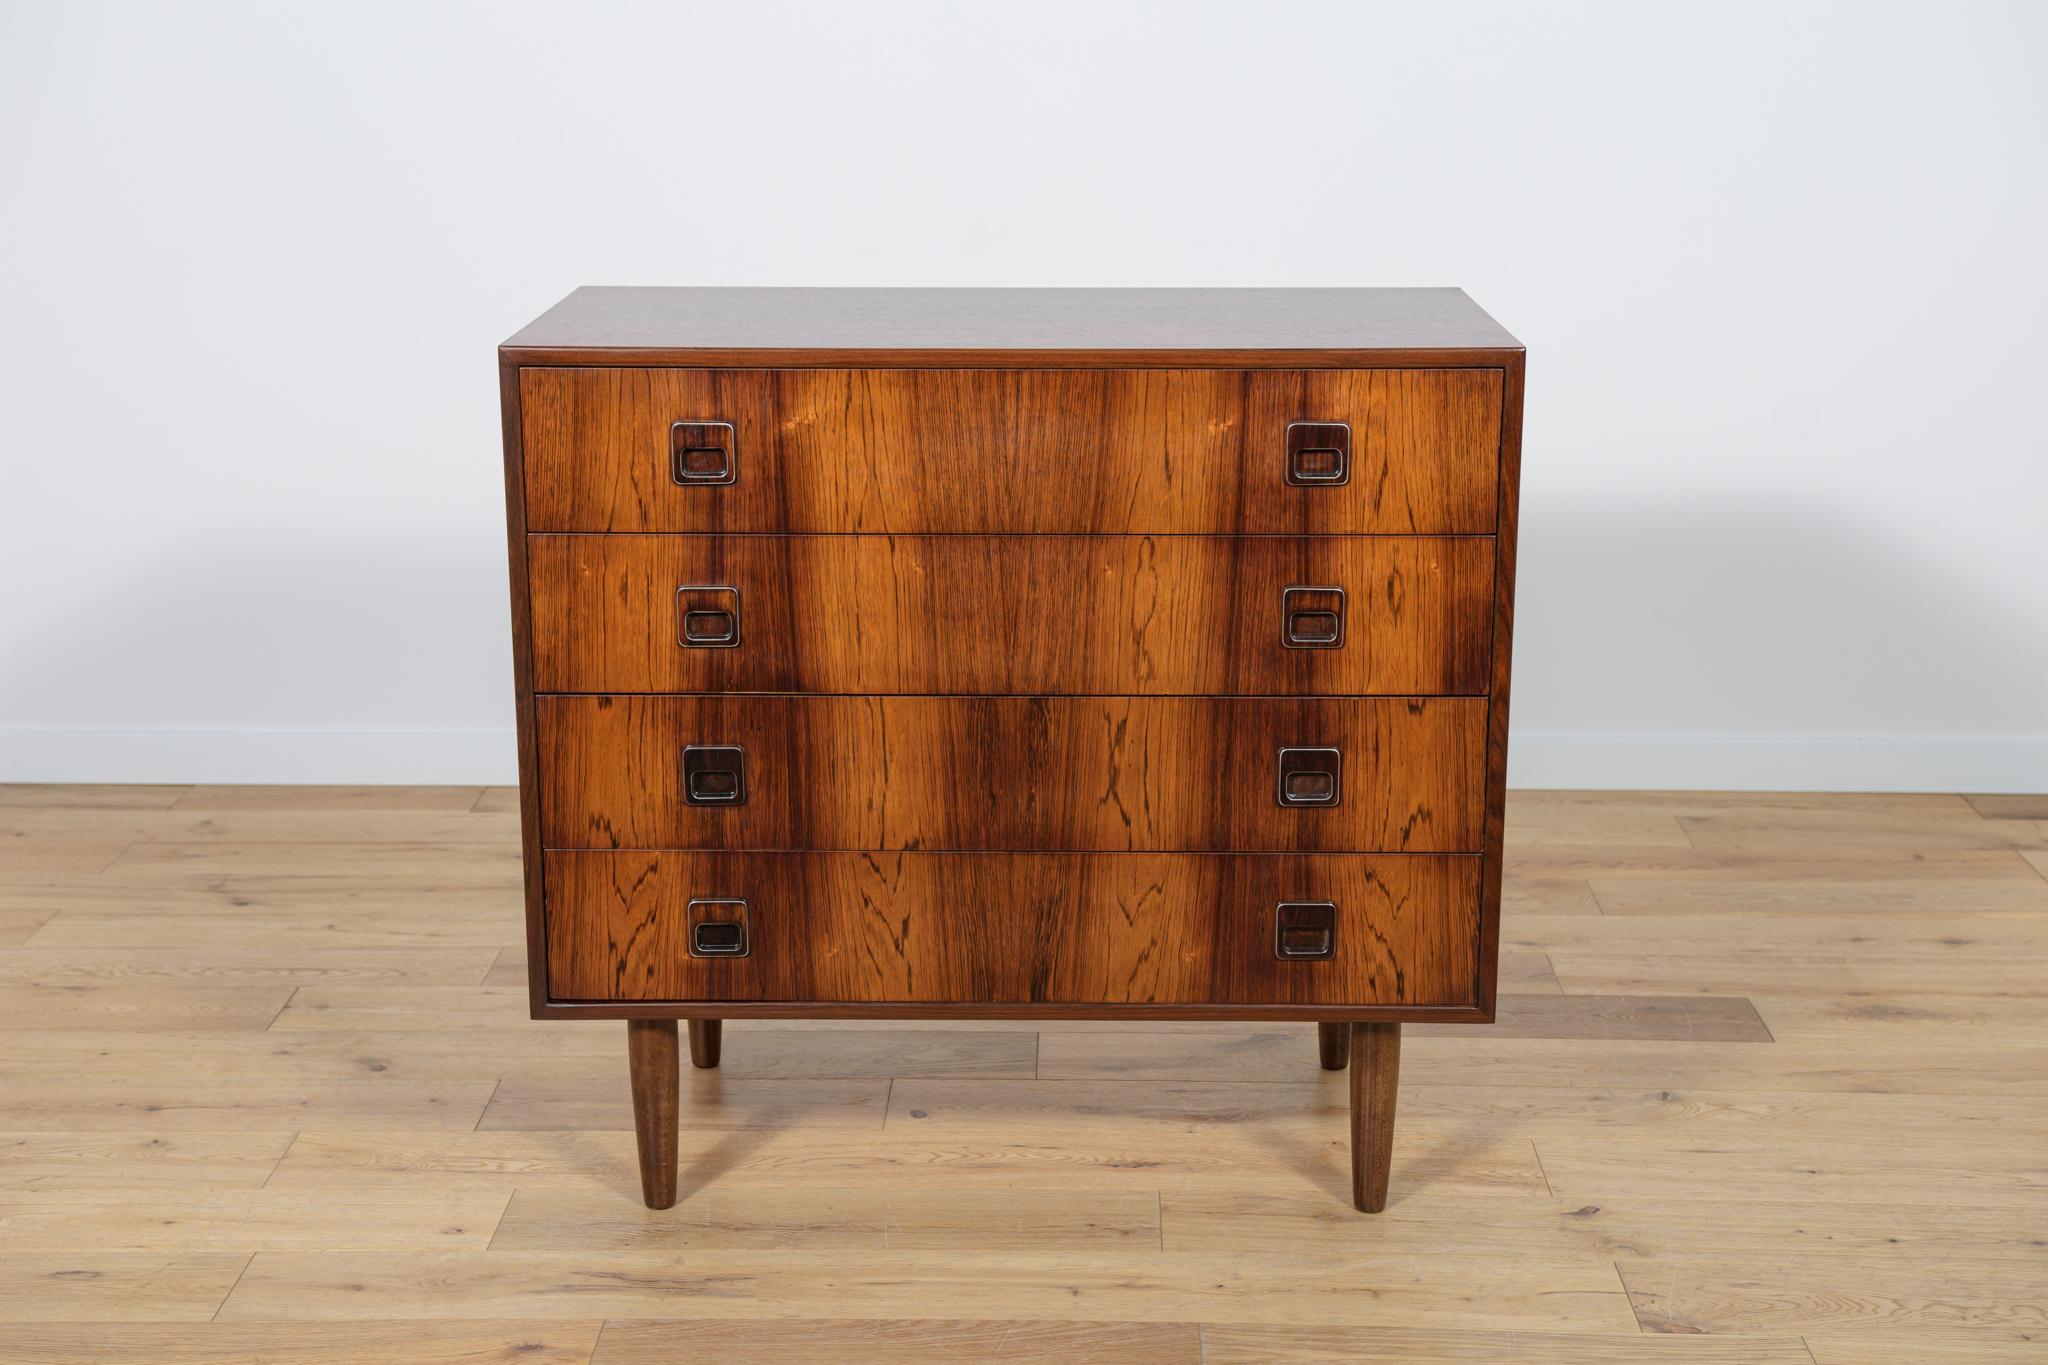 Mid-Century rosewood dresser made during the 1960s in the Denmark. The dresser has profiled handles with a metal accent. The dresser consists of 4 drawers.
The dresser has been cleaned with old surface and finished with guality Danish Oil.